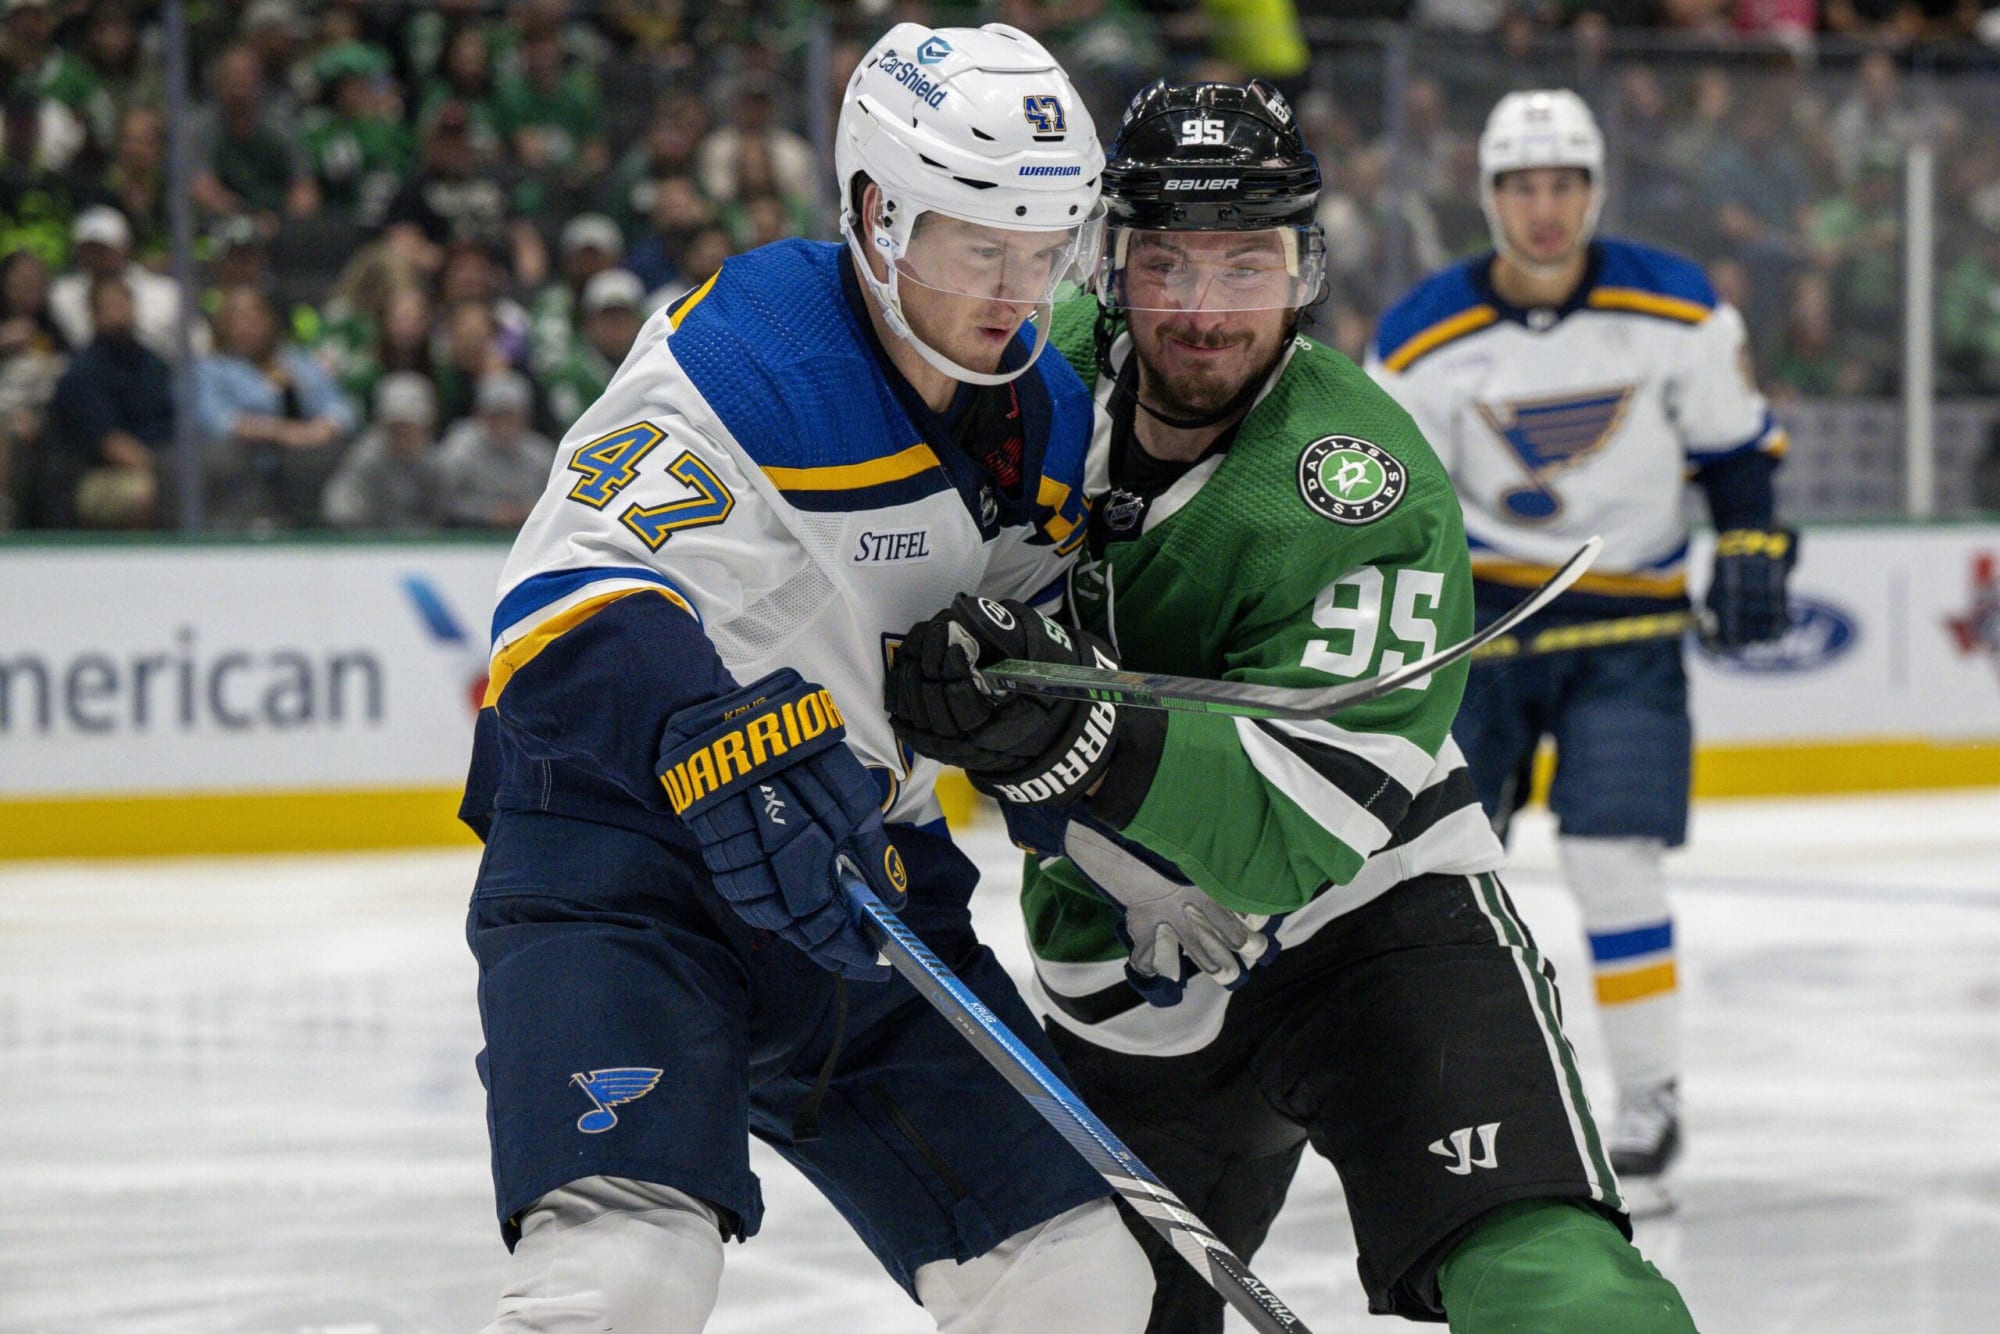 St. Louis Blues - We have the opponent. We have the schedule. Now